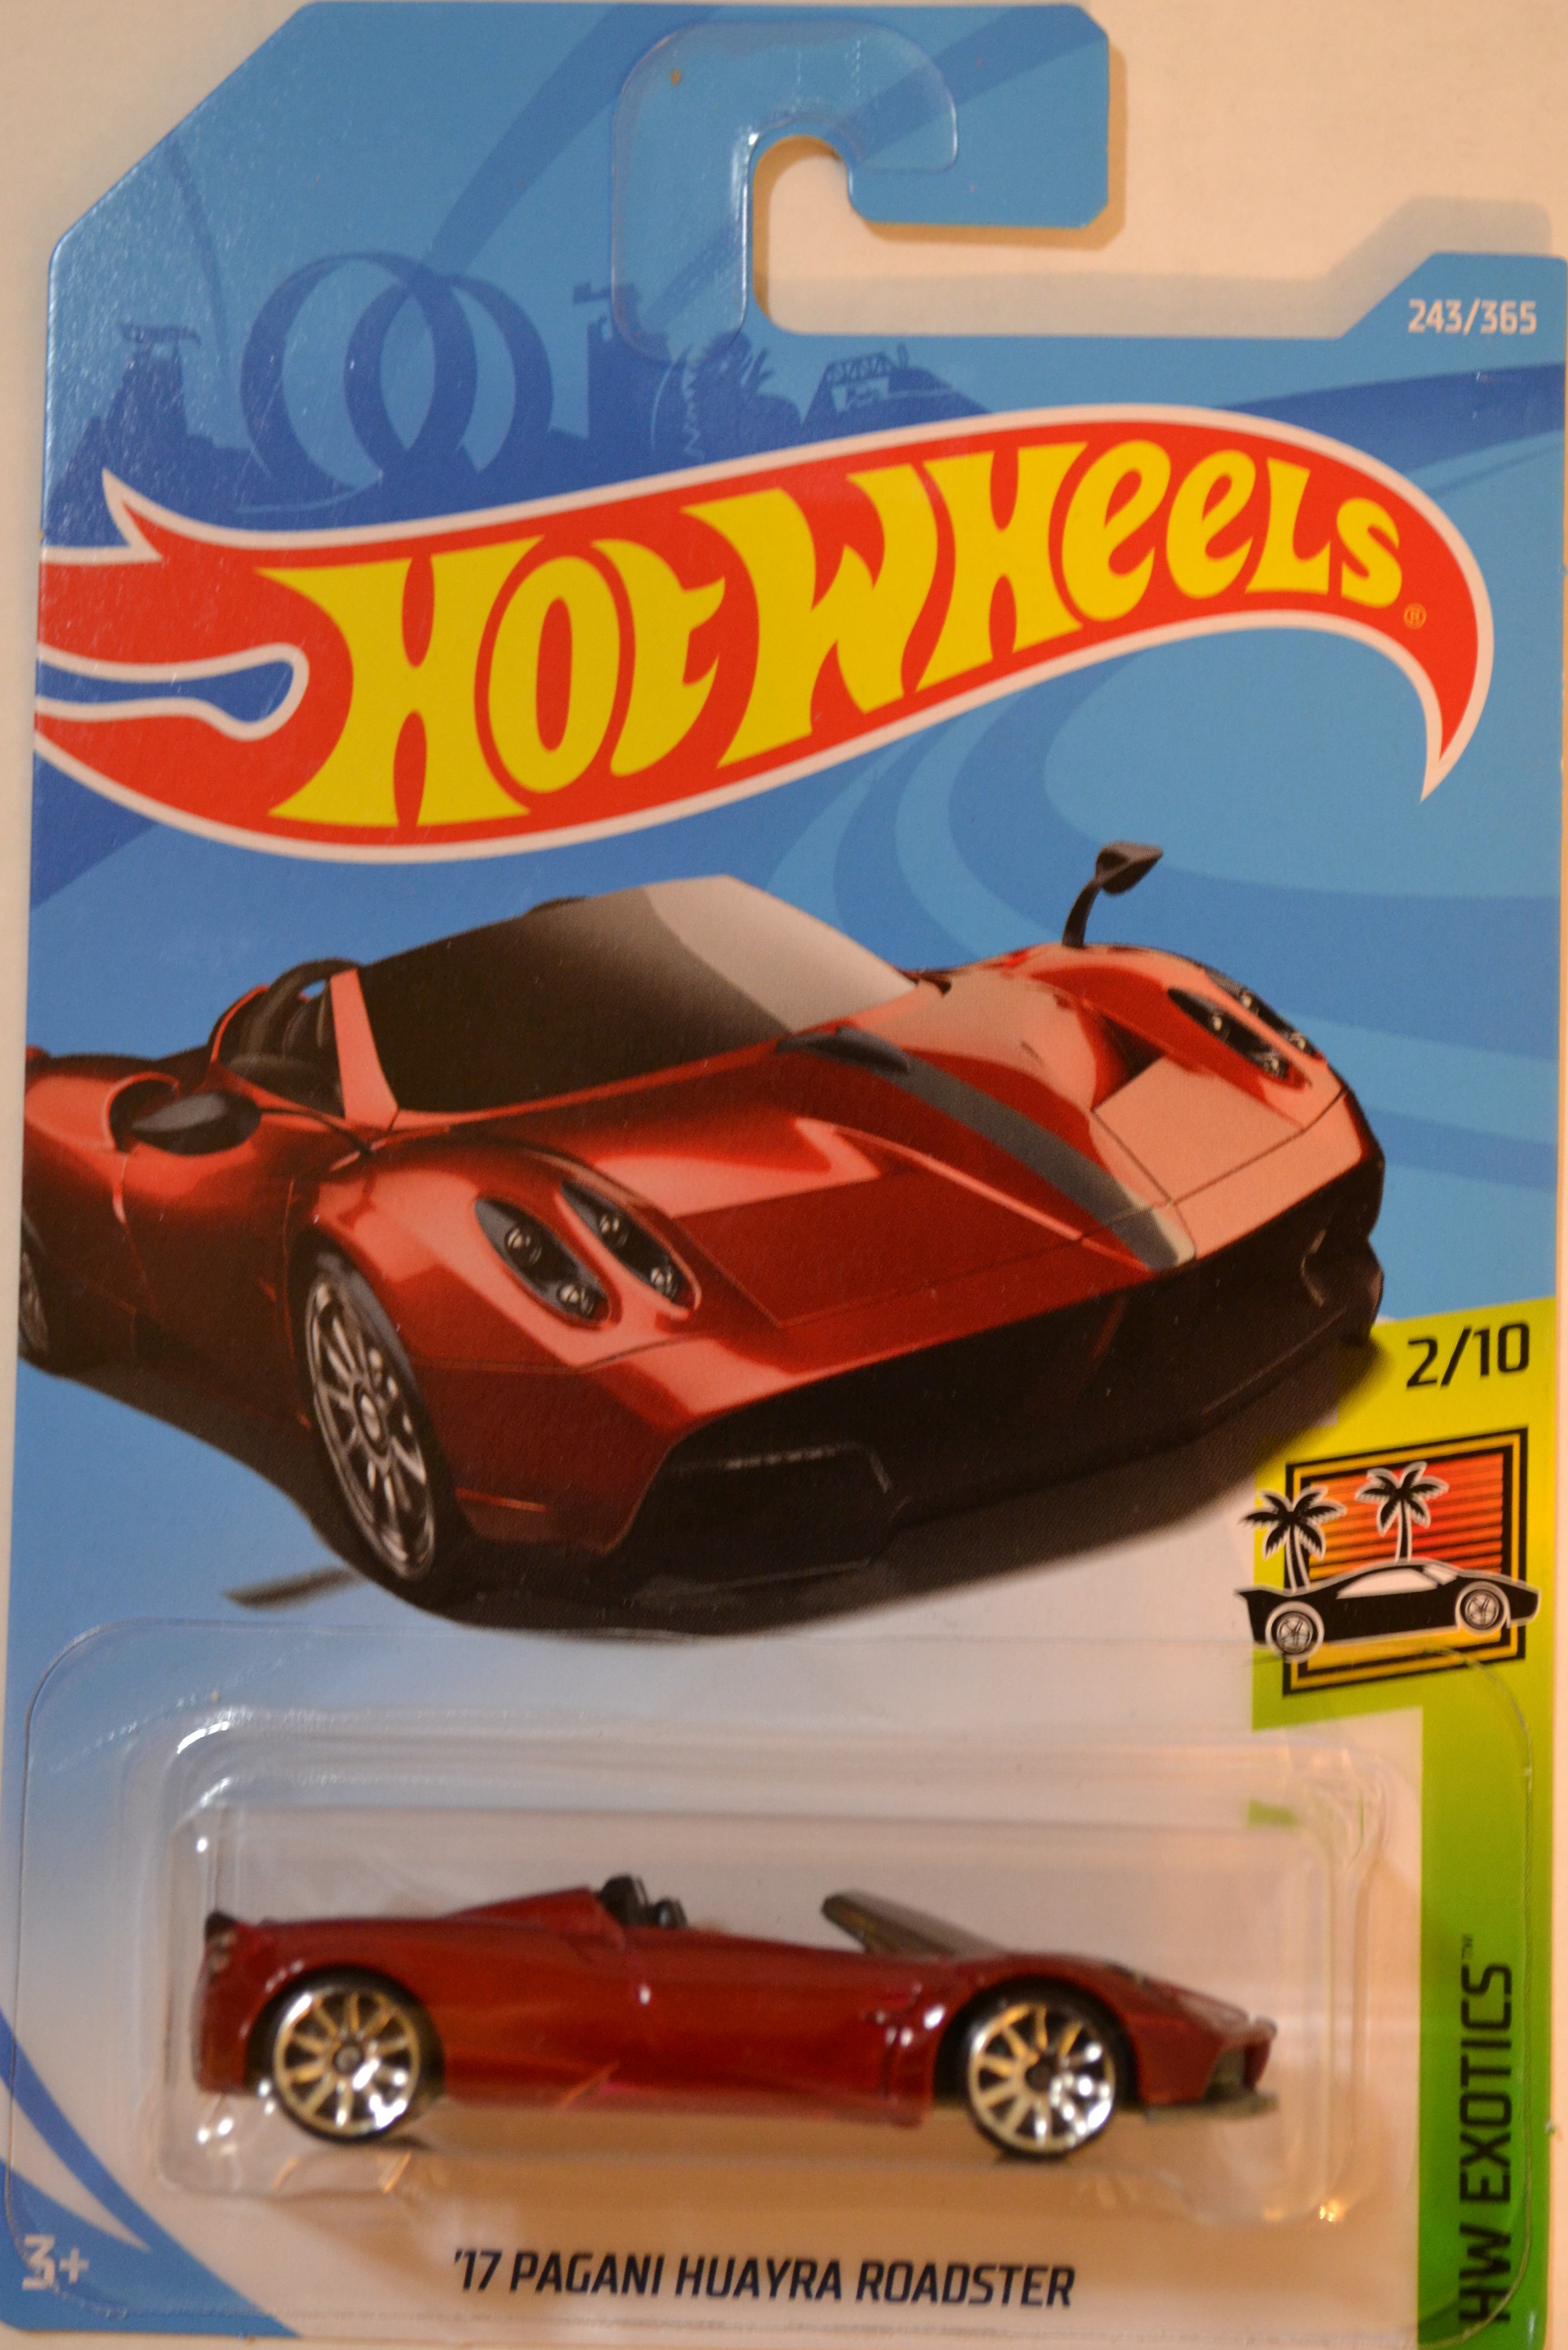 Red Pagani Huayra Roadster Hot Wheels Hw Exotics Series 164 Scale Collectable Die Cast Model 2875